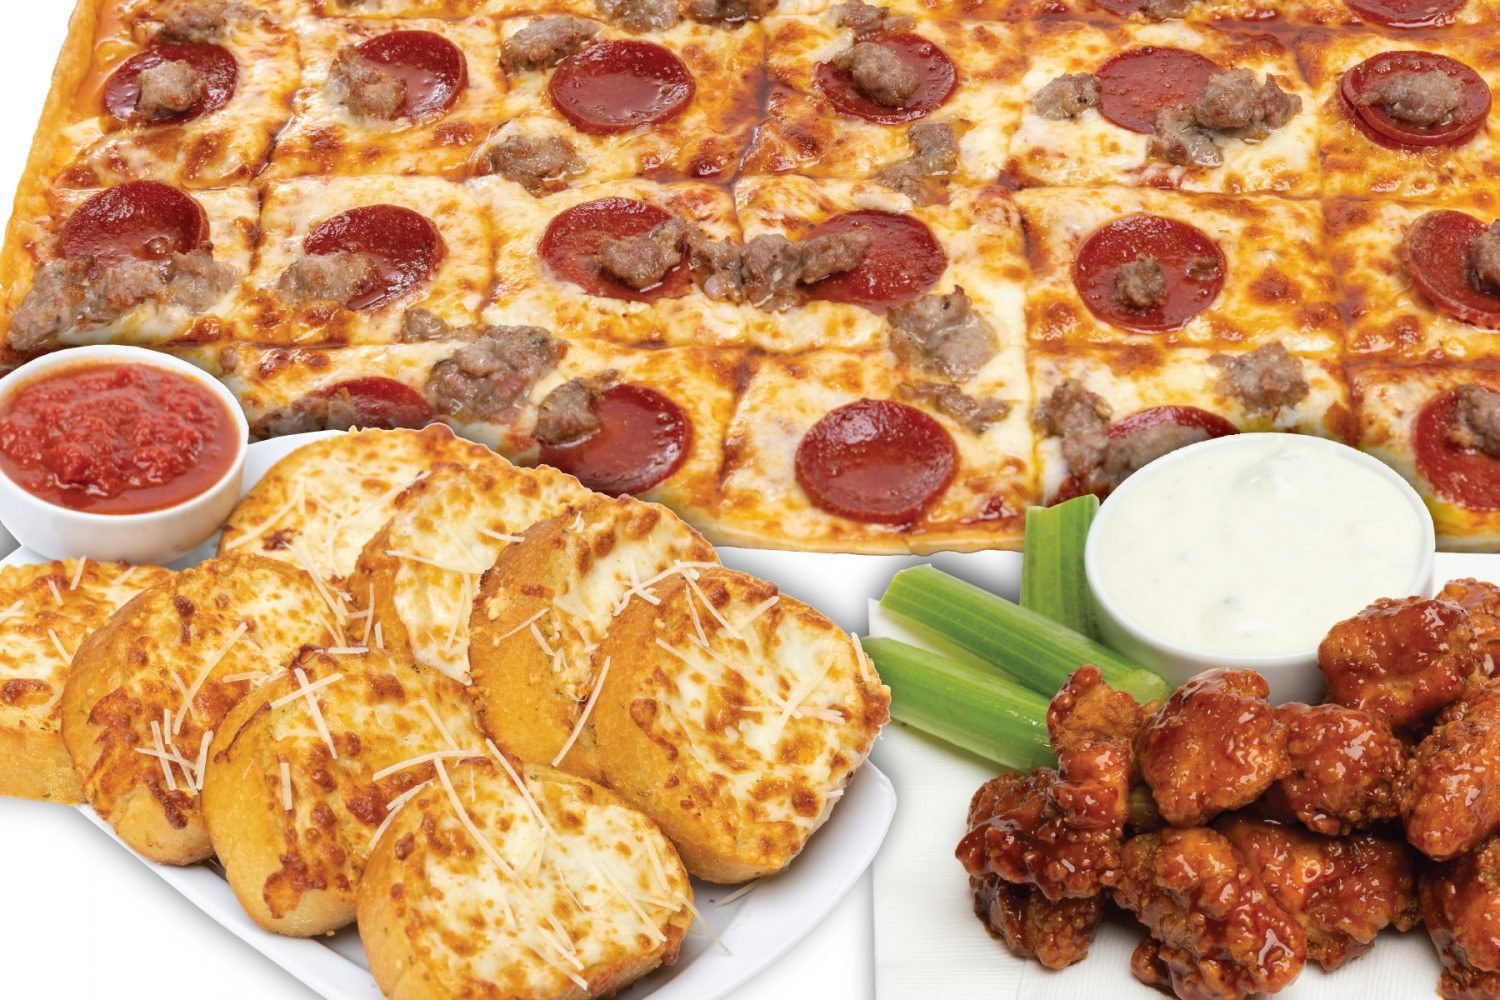 Football Deal 18" 2 topping pizza, cheesy garlic bread and boneless wings